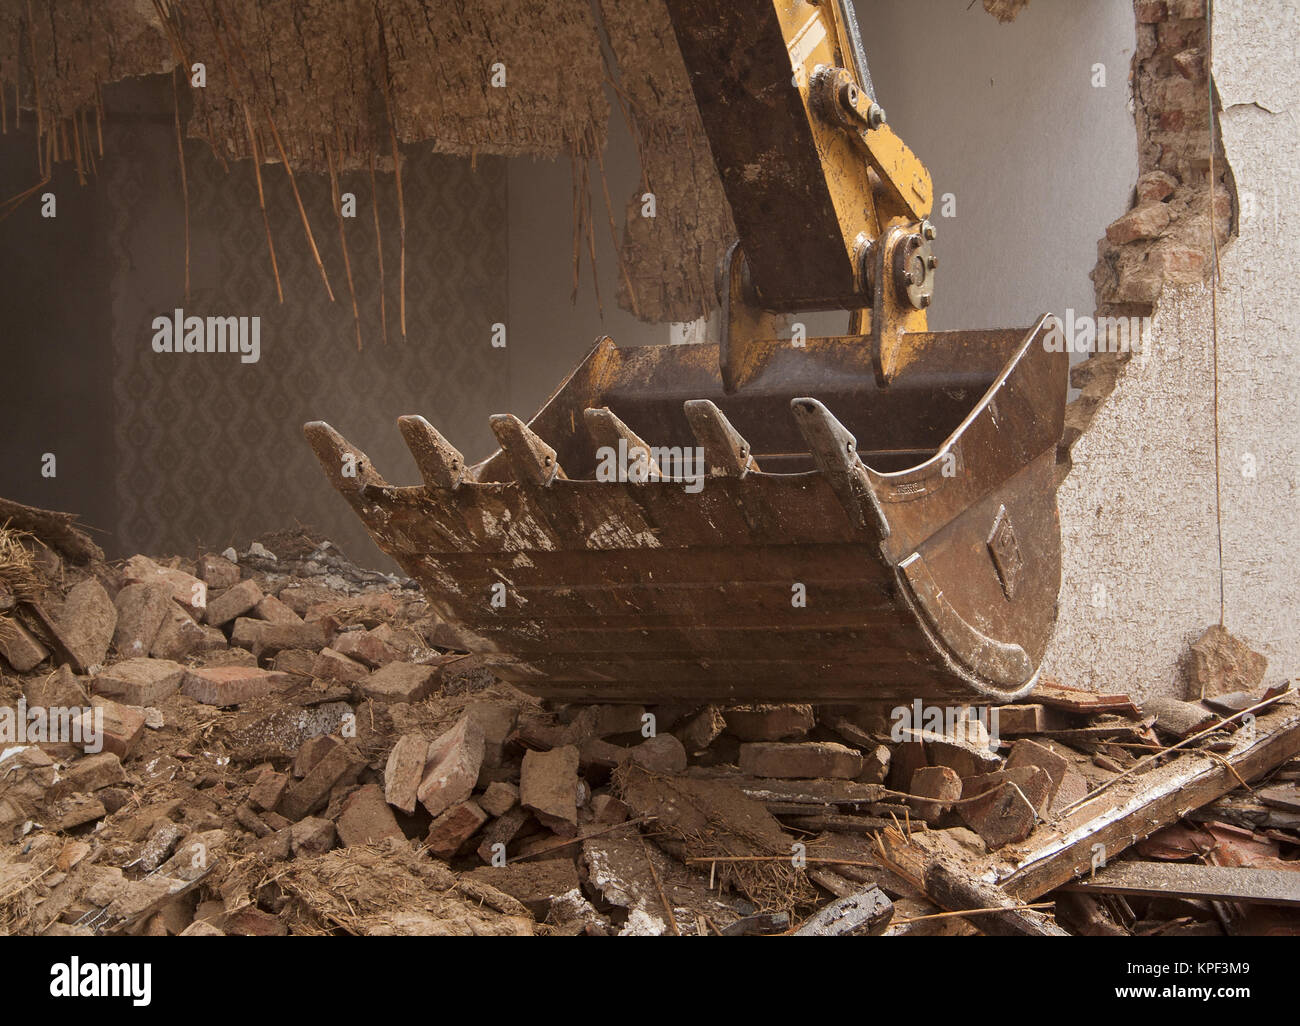 A large track hoe excavator tearing down an old house Stock Photo